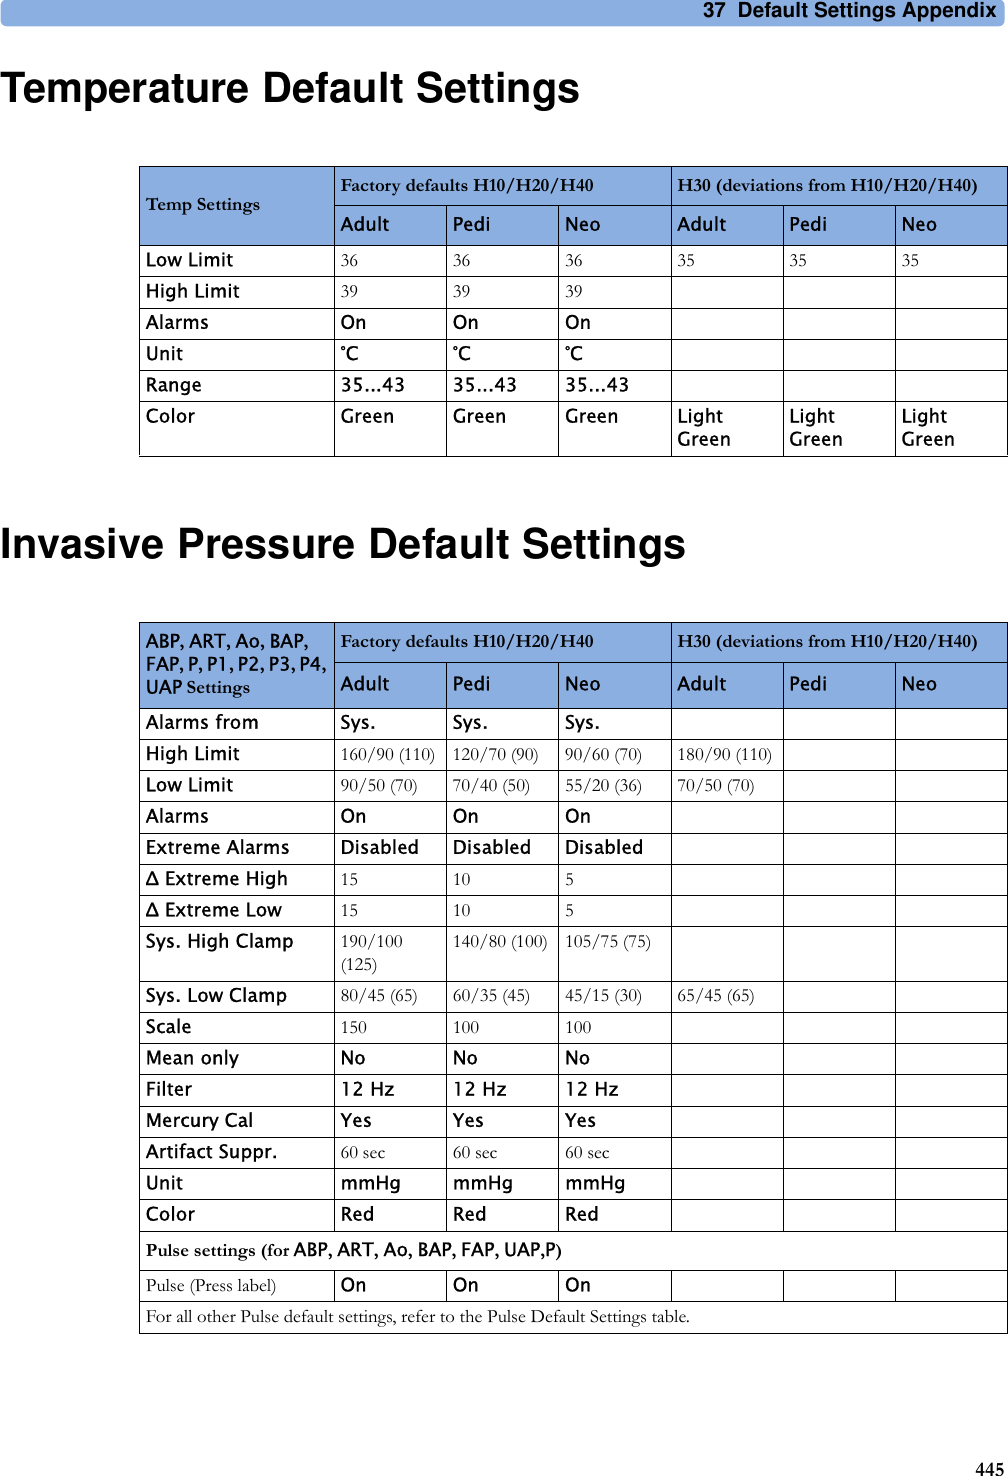 37 Default Settings Appendix445Temperature Default SettingsInvasive Pressure Default SettingsTemp SettingsFactory defaults H10/H20/H40 H30 (deviations from H10/H20/H40)Adult Pedi Neo Adult Pedi NeoLow Limit 36 36 36 35 35 35High Limit 39 39 39Alarms On On OnUnit °C °C °CRange 35...43 35...43 35...43Color Green Green Green Light GreenLight GreenLight GreenABP, ART, Ao, BAP, FAP, P, P1, P2, P3, P4, UAP SettingsFactory defaults H10/H20/H40 H30 (deviations from H10/H20/H40)Adult Pedi Neo Adult Pedi NeoAlarms from Sys. Sys. Sys.High Limit 160/90 (110) 120/70 (90) 90/60 (70) 180/90 (110)Low Limit 90/50 (70) 70/40 (50) 55/20 (36) 70/50 (70)Alarms On On OnExtreme Alarms Disabled Disabled DisabledΔ Extreme High 15 10 5Δ Extreme Low 15 10 5Sys. High Clamp 190/100 (125)140/80 (100) 105/75 (75)Sys. Low Clamp 80/45 (65) 60/35 (45) 45/15 (30) 65/45 (65)Scale 150 100 100Mean only No No NoFilter 12 Hz 12 Hz 12 HzMercury Cal Yes Yes YesArtifact Suppr. 60 sec 60 sec 60 secUnit mmHg mmHg mmHgColor Red Red RedPulse settings (for ABP, ART, Ao, BAP, FAP, UAP,P)Pulse (Press label) On On OnFor all other Pulse default settings, refer to the Pulse Default Settings table.